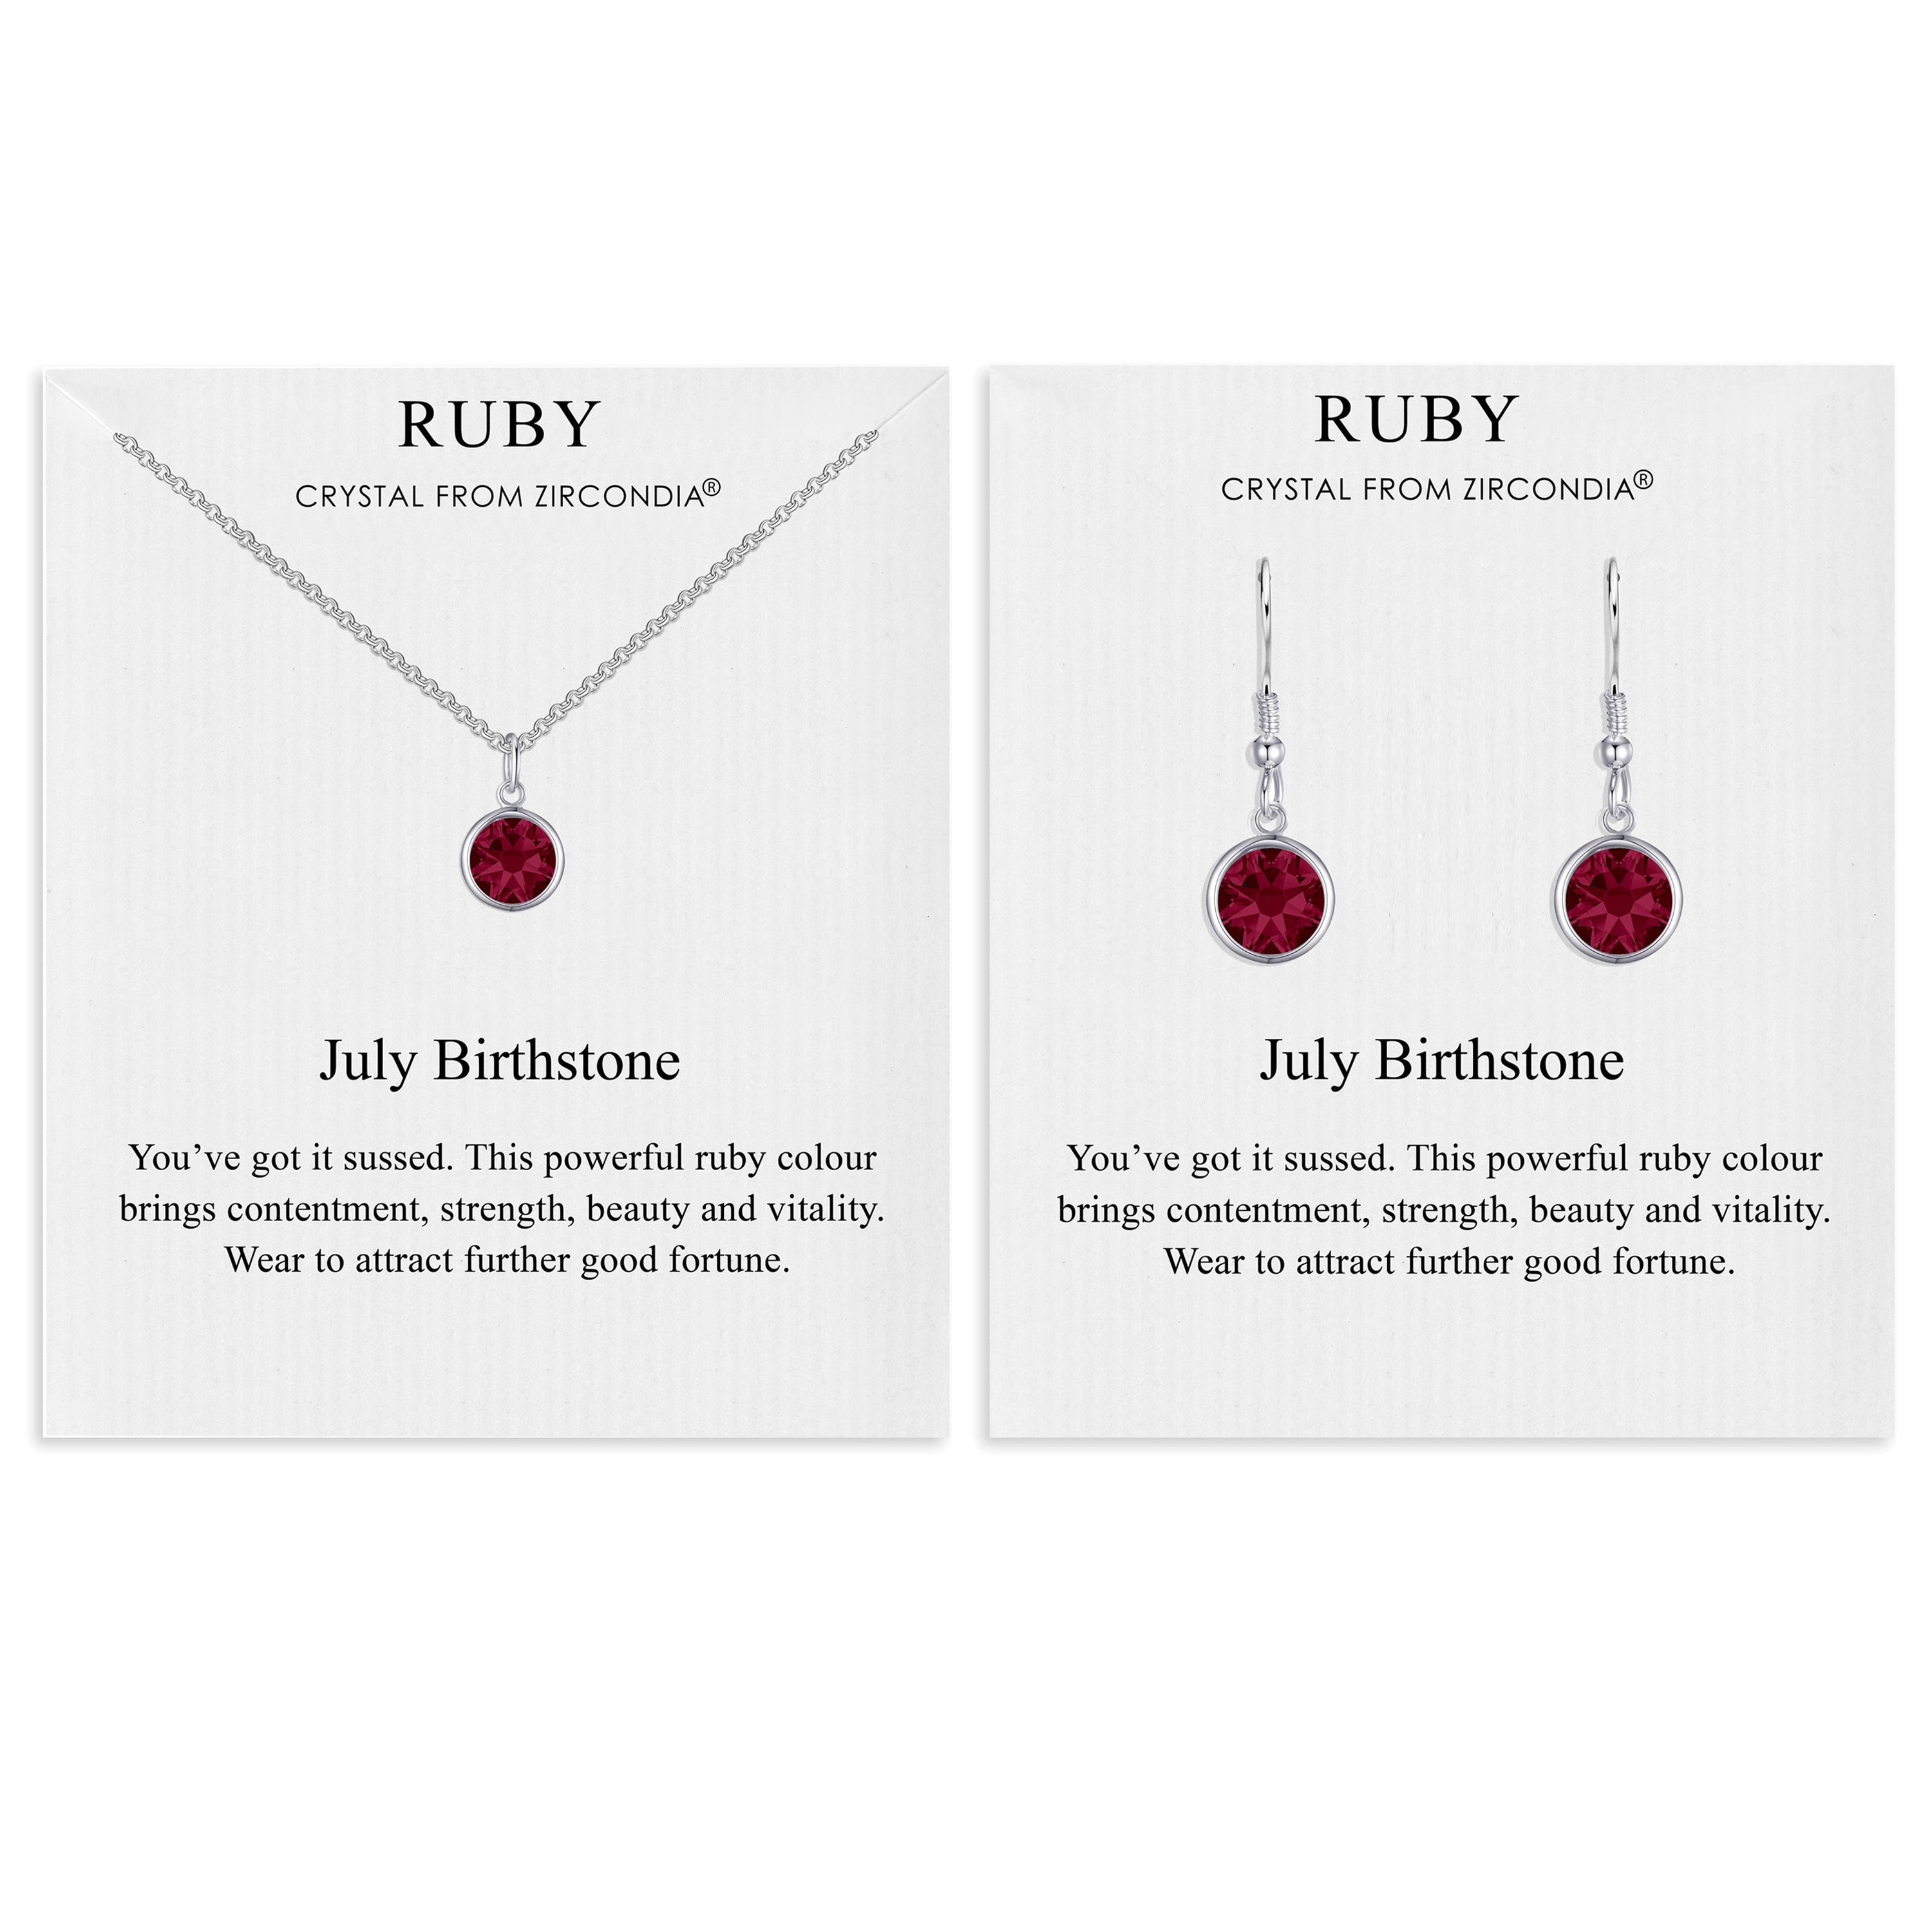 July (Ruby) Birthstone Necklace & Drop Earrings Set Created with Zircondia® Crystals by Philip Jones Jewellery